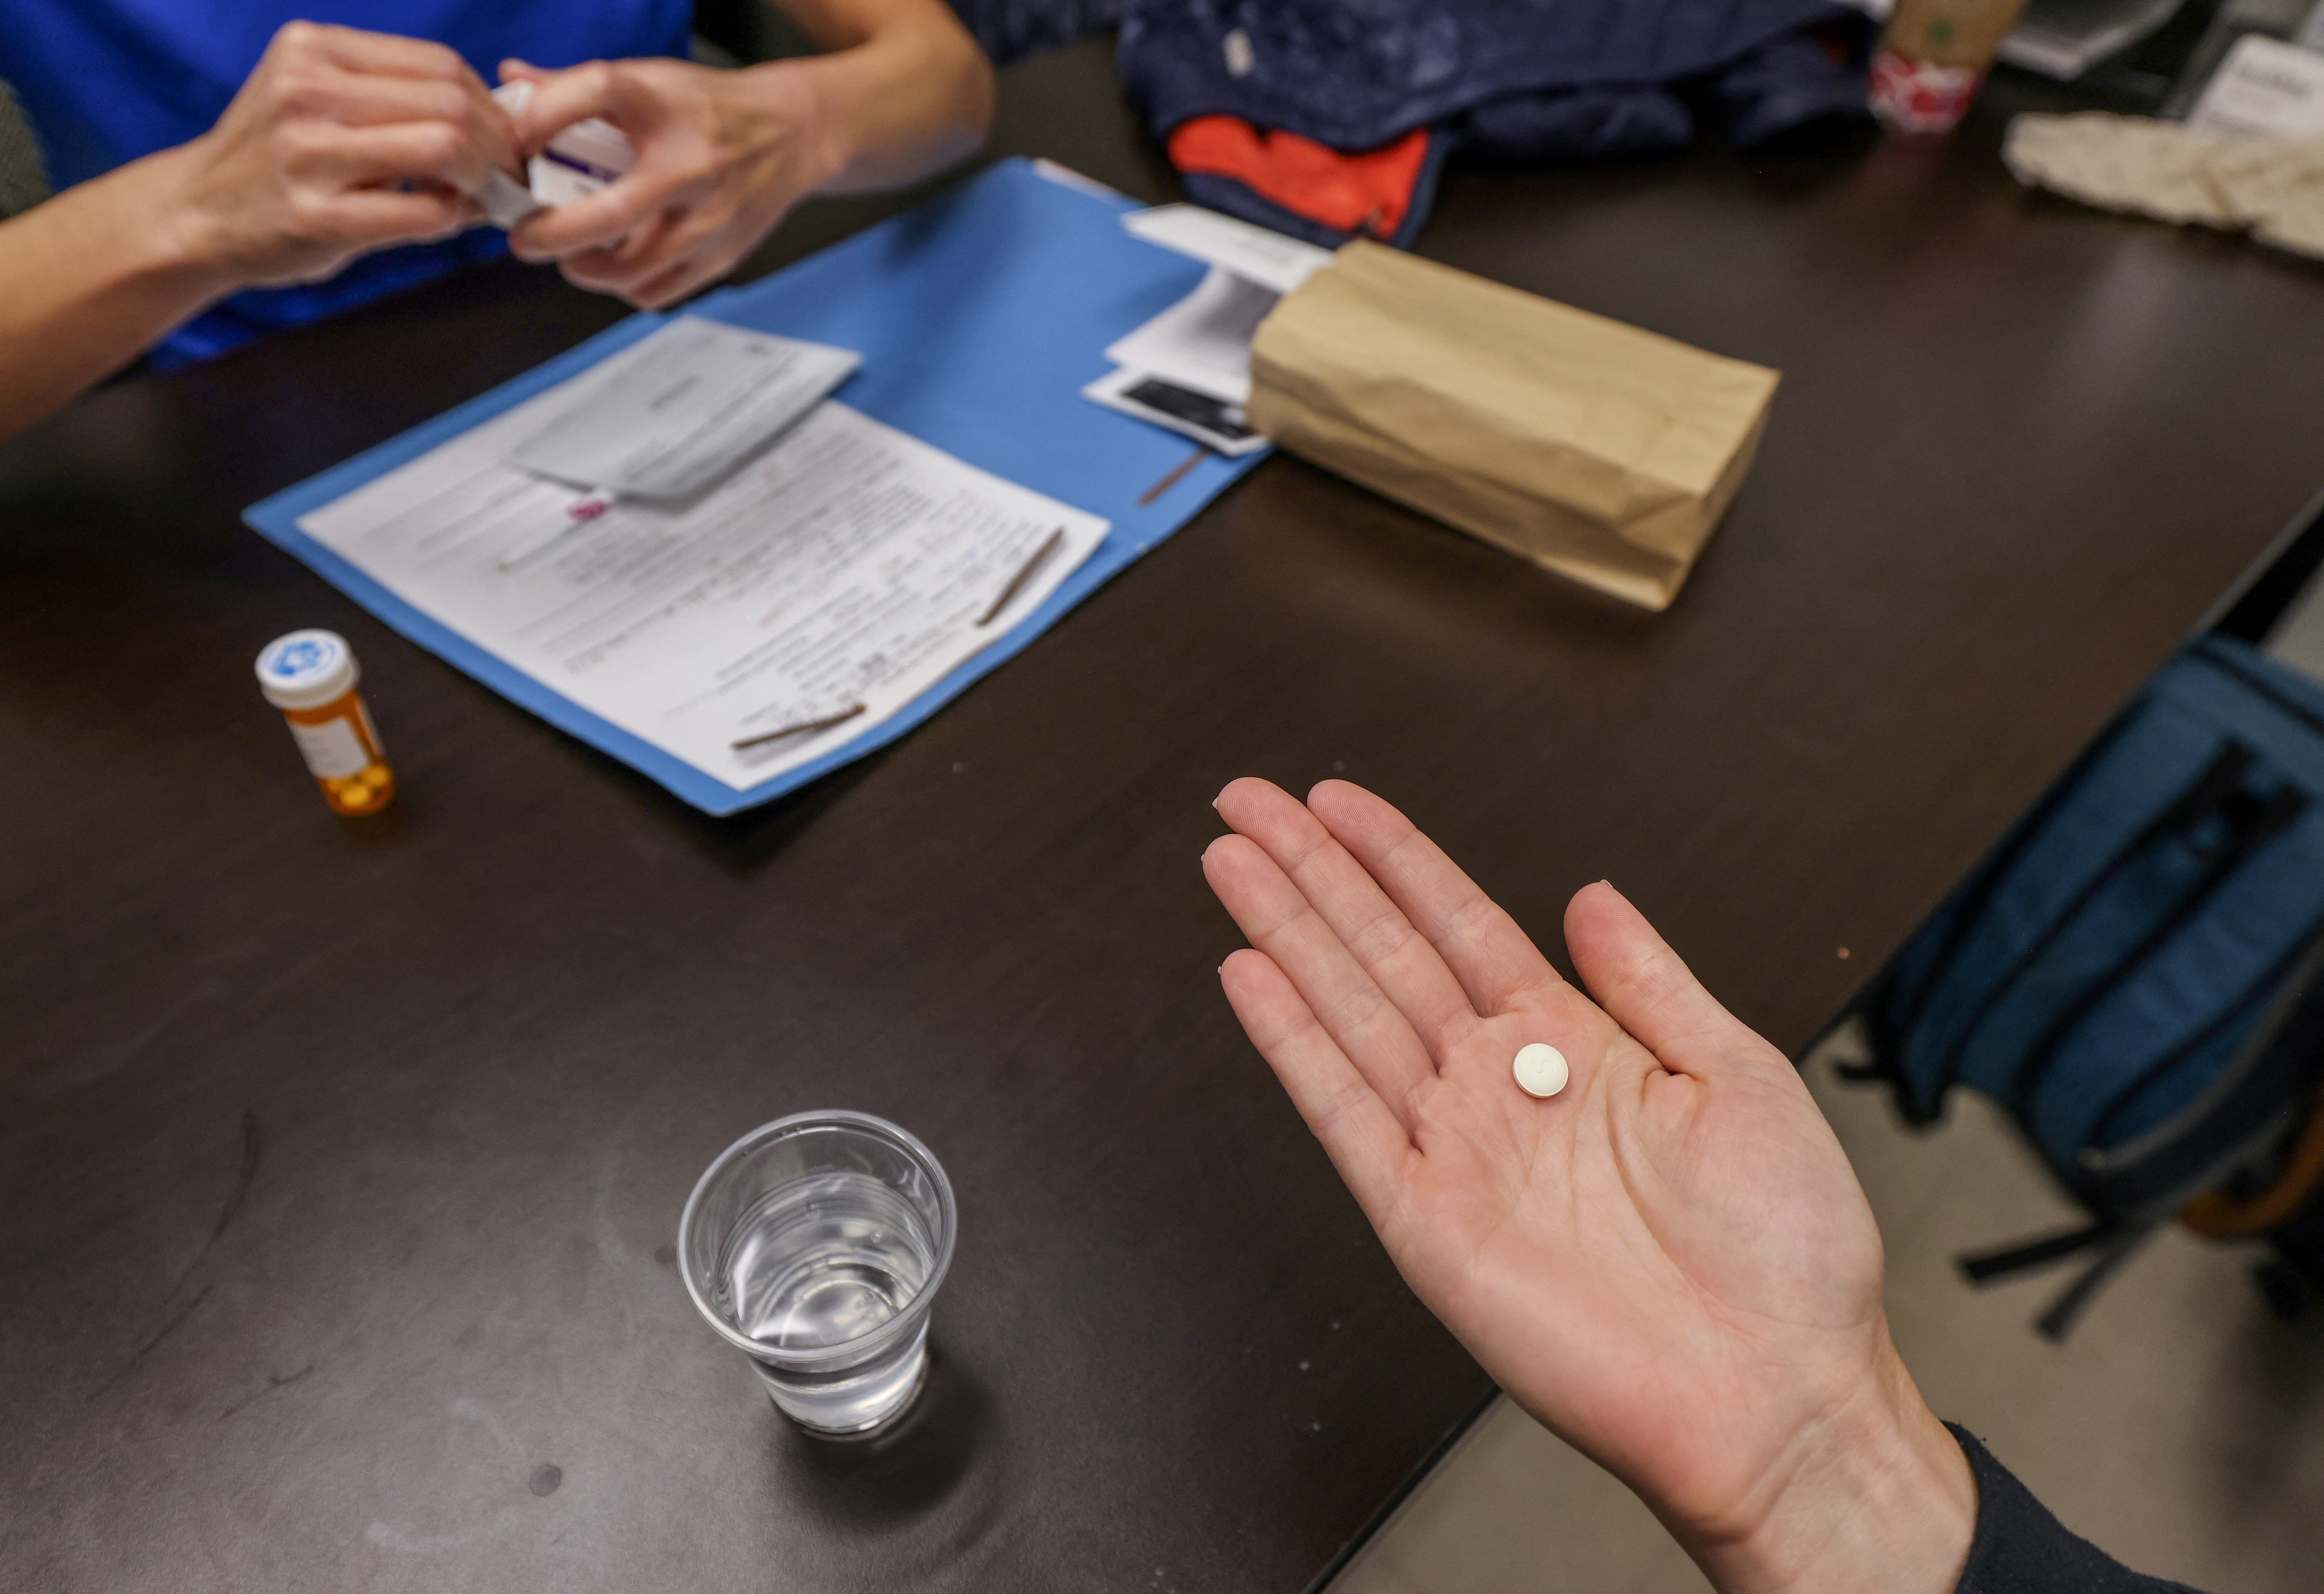 Dr. Shelly Tien hands a patient the initial abortion inducing medication at Trust Women clinic in Oklahoma City, U.S., December 6, 2021.